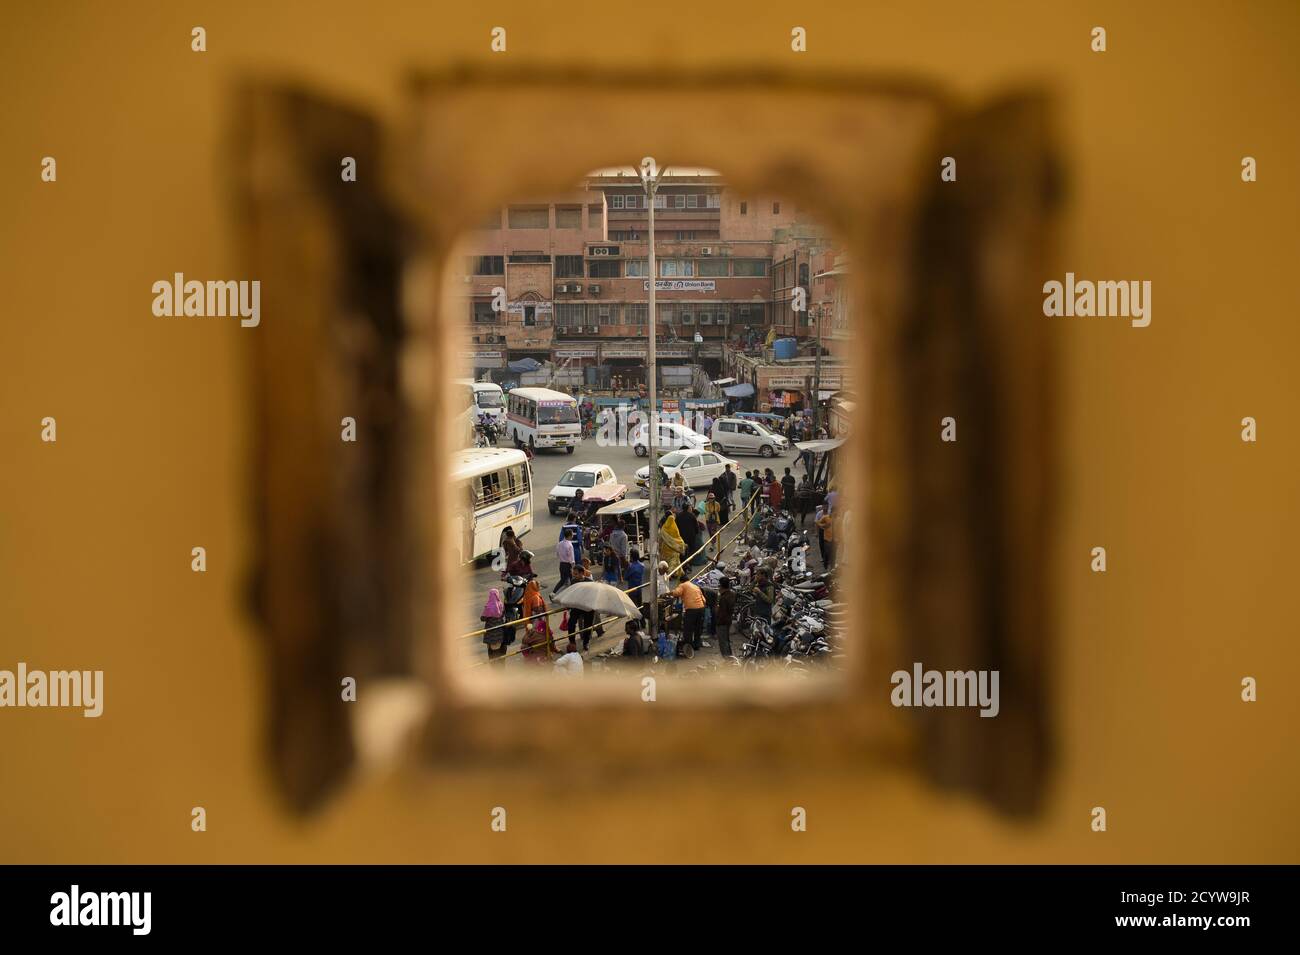 (Selective focus) View through the window, City life through the streets of Jaipur during the Covid-19 outbreak. Stock Photo